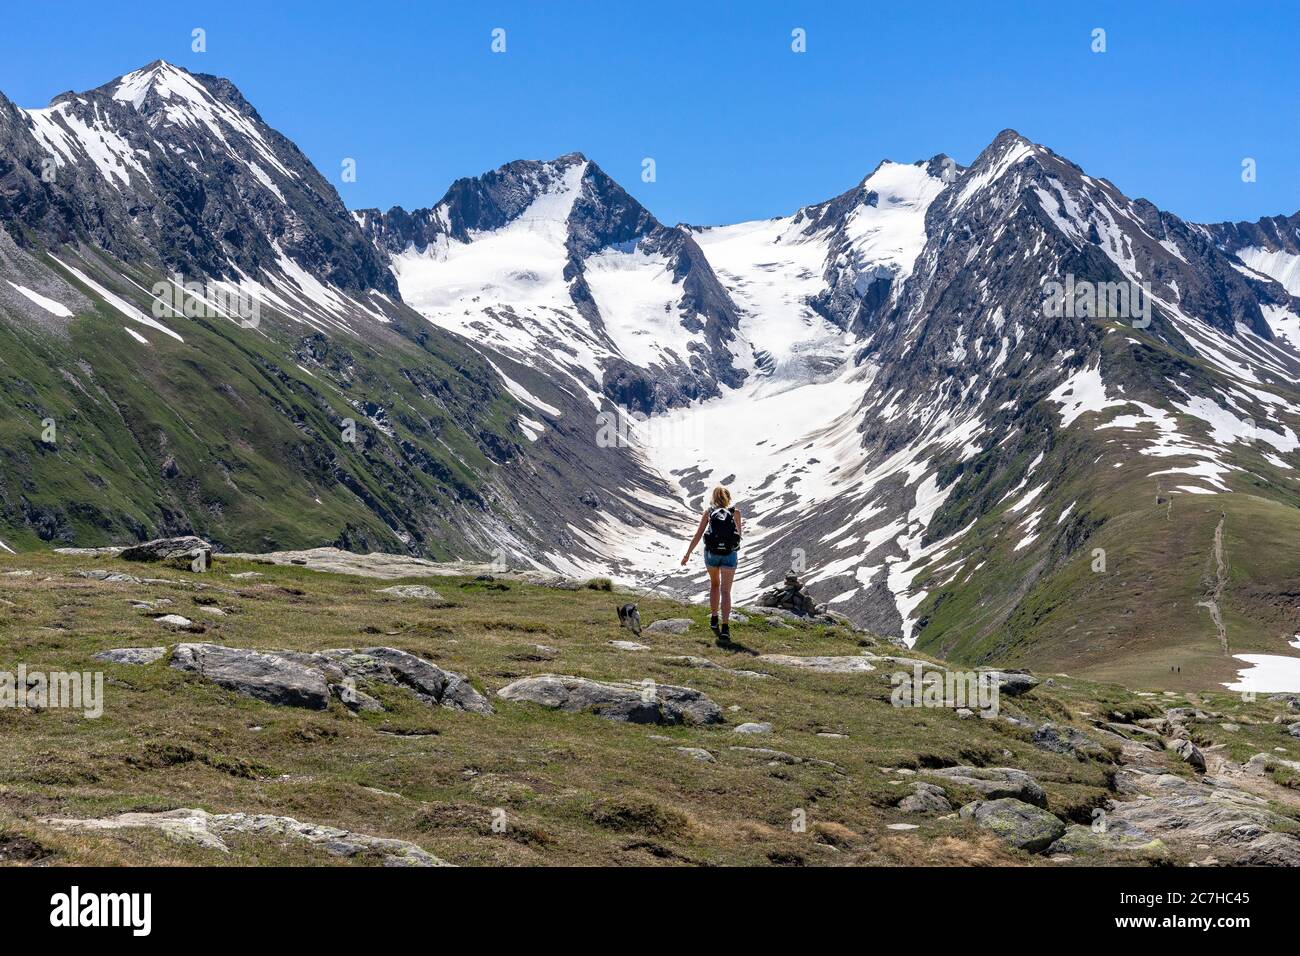 Europe, Austria, Tyrol, Ötztal Alps, Ötztal, hikers on the Hohe Mut Sattel in front of the Gaisbergferner with Hochfirst, Liebenerspitze and Kirchenkogel Stock Photo